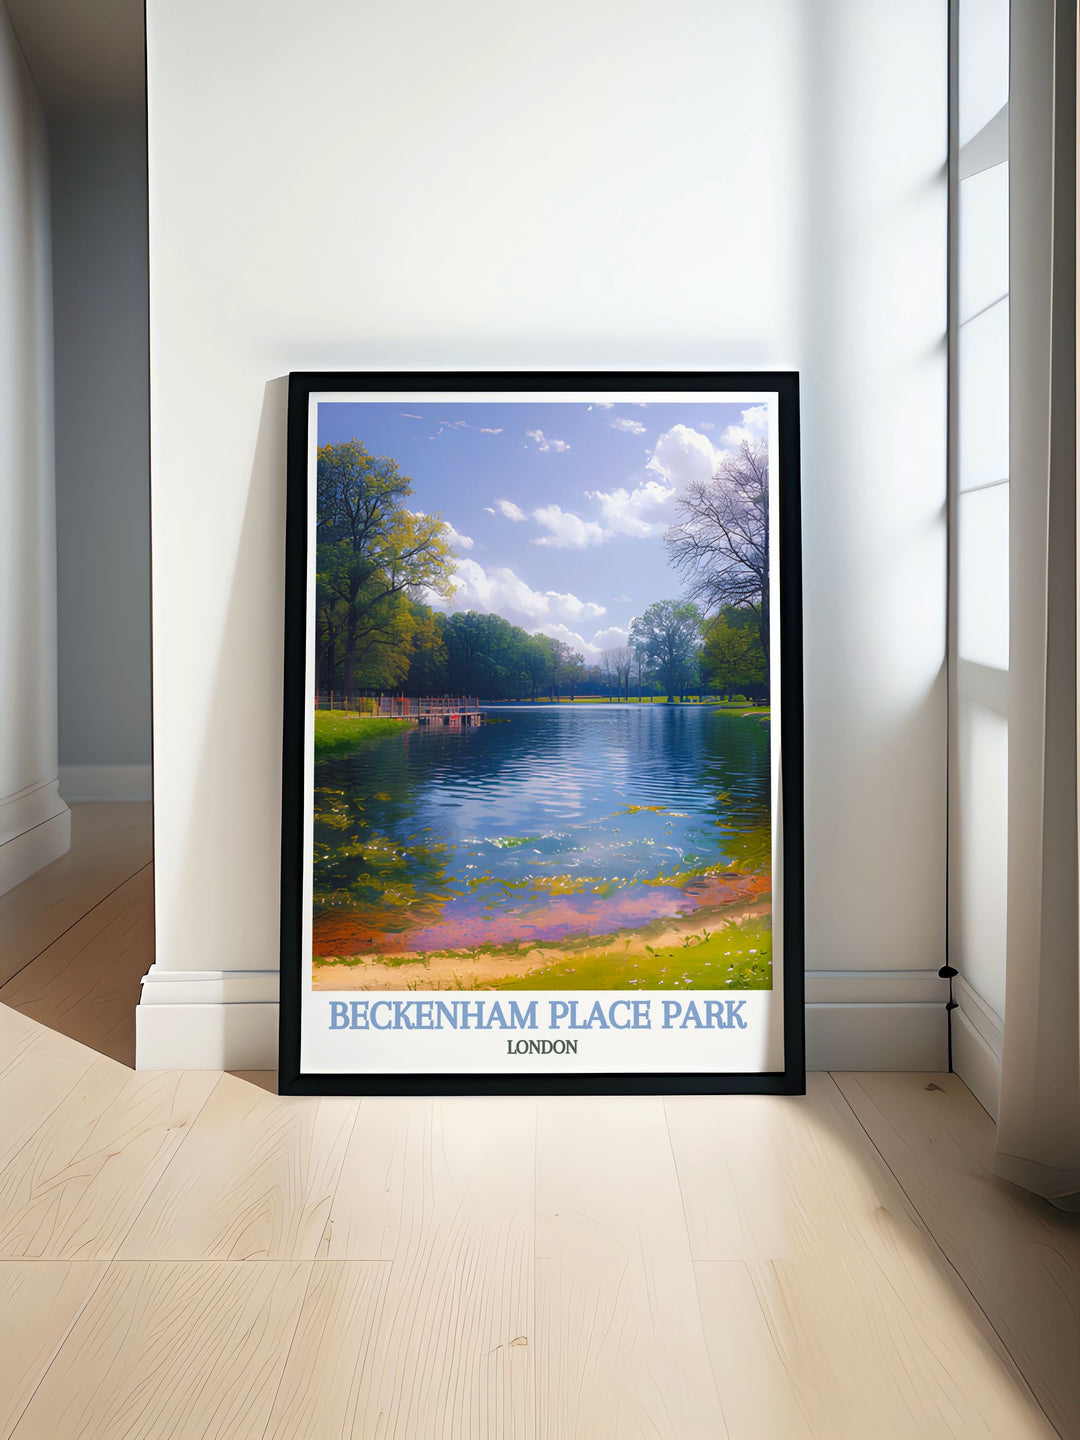 Immerse yourself in the tranquil beauty of Beckenham Place Park with our stunning wall art, capturing the essence of this iconic London park in exquisite detail. The vibrant greenery, ancient trees, and serene walking paths create a perfect blend of nature and art for your home decor.